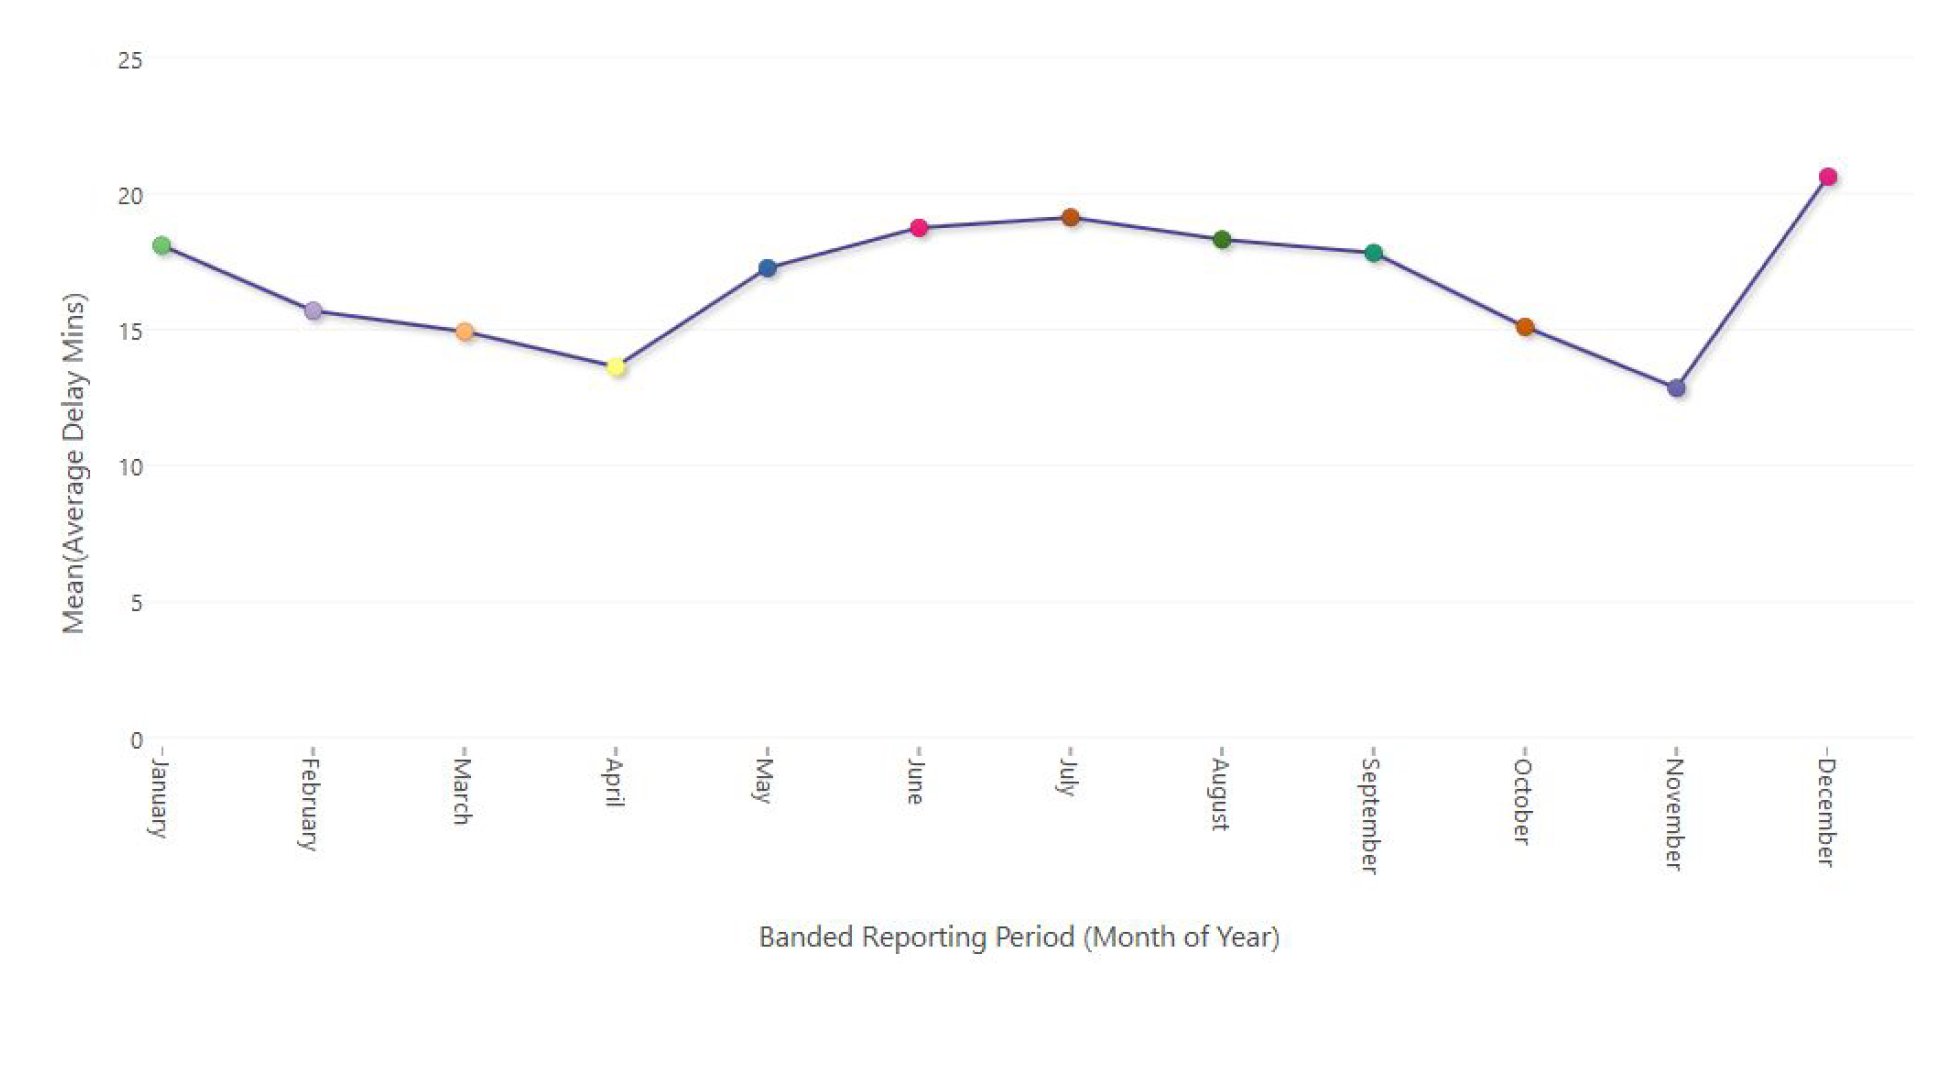 Branded Reporting Period (Month of Year)